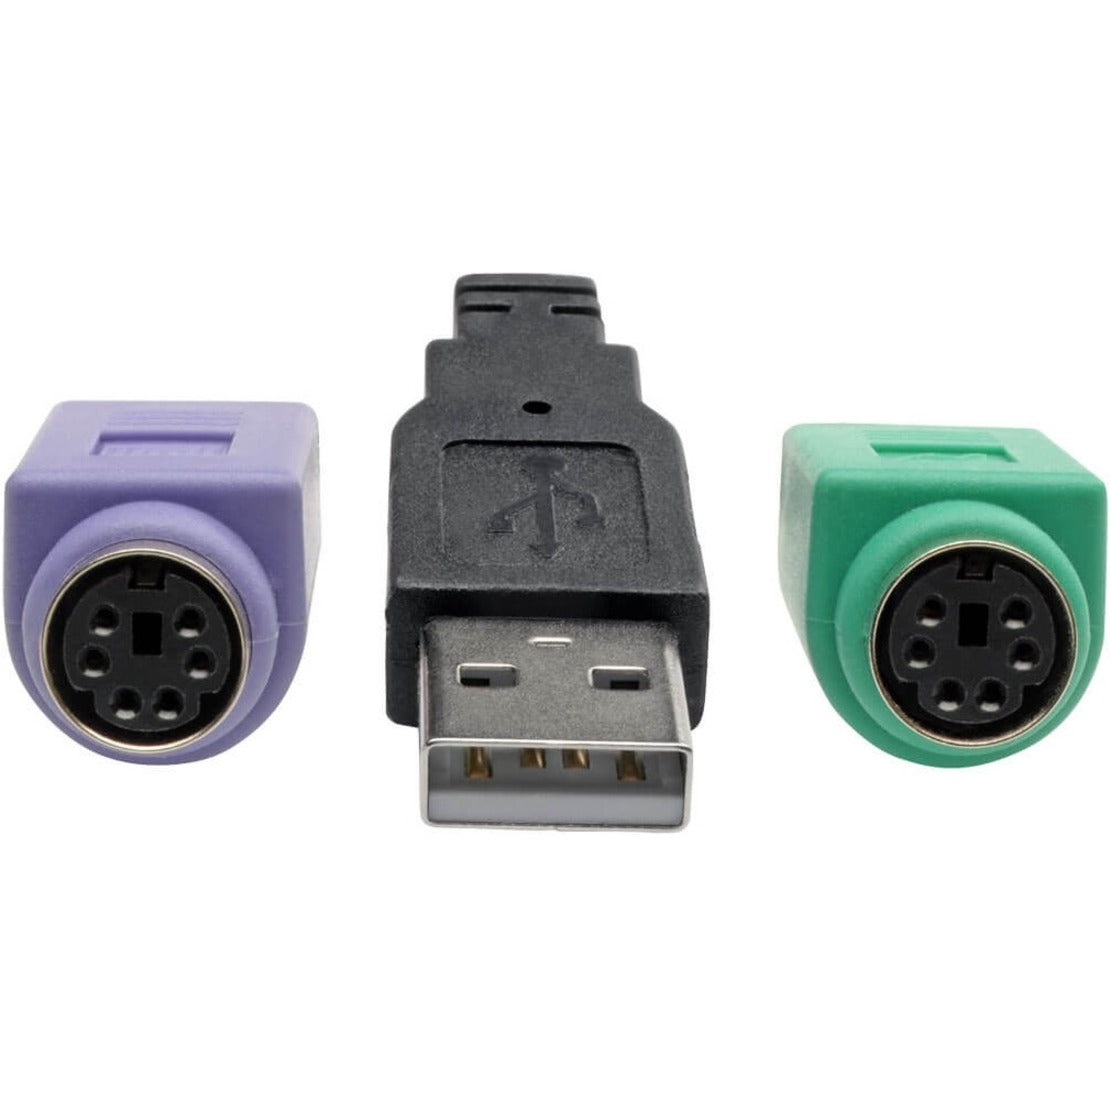 Tripp Lite U219-000-R USB to PS/2 Adapter for Notebook/Laptop, Plug-and-Play Compatibility